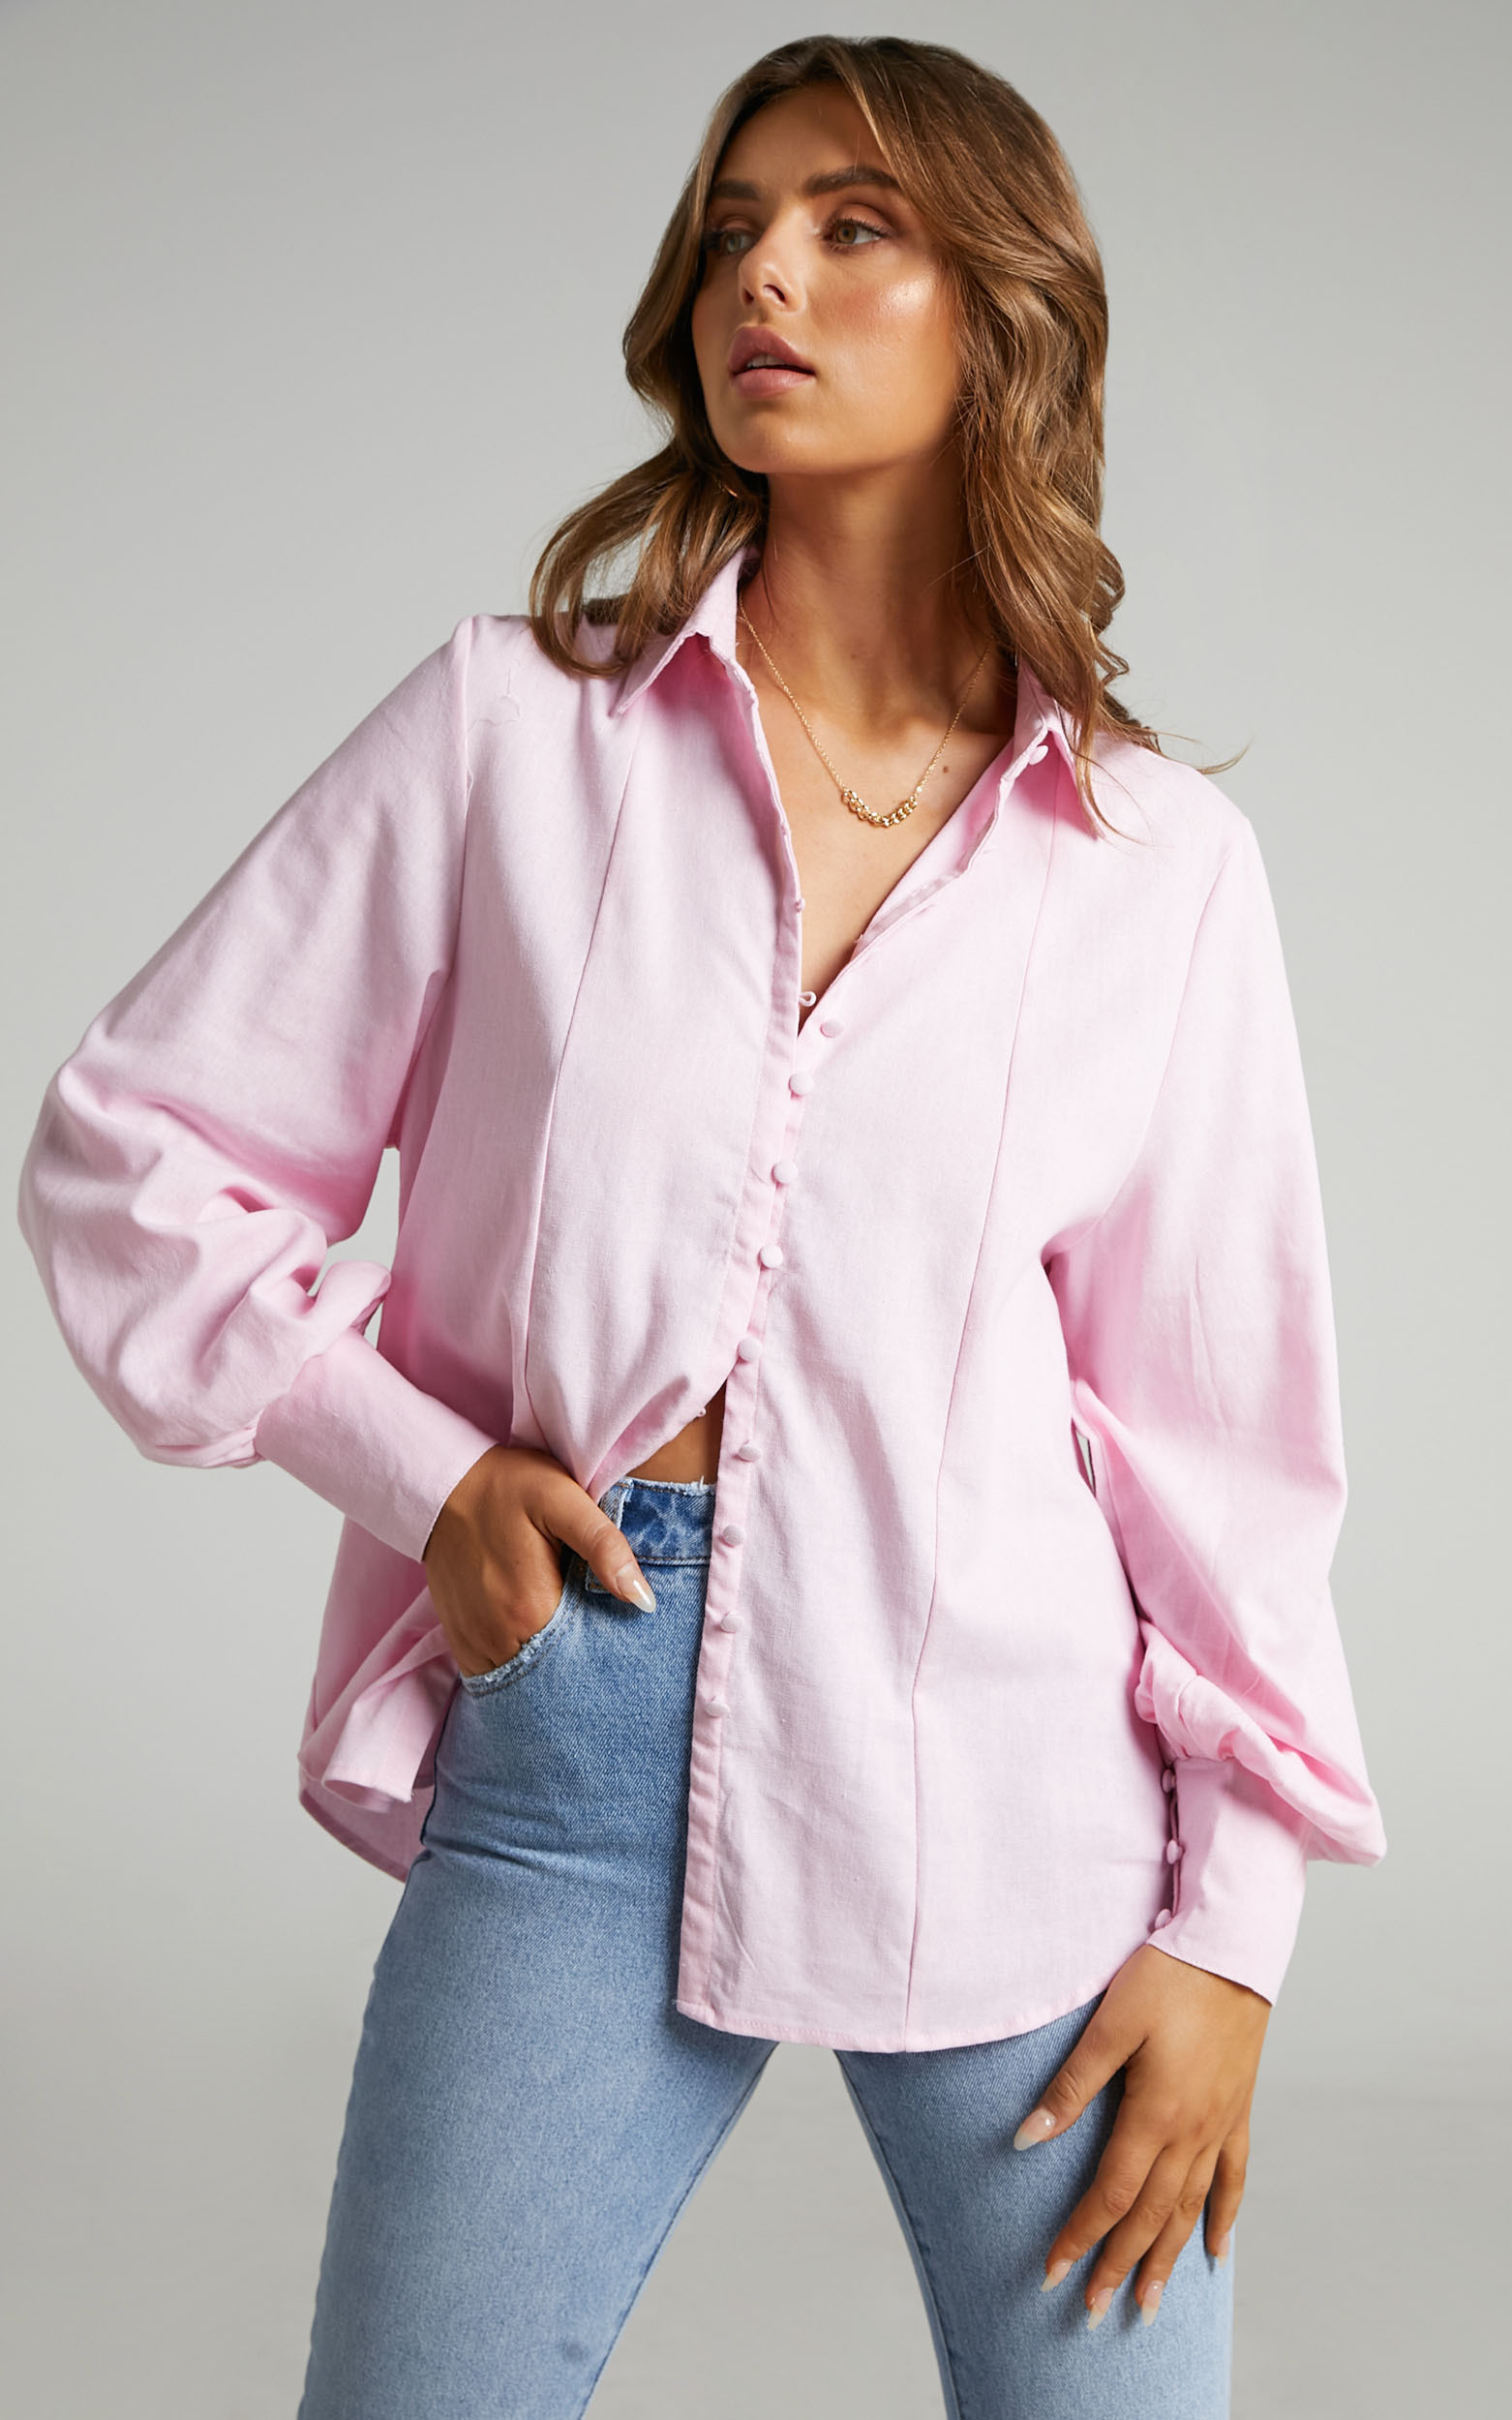 Kiva Blouse in Baby Pink - 06, PNK3, hi-res image number null